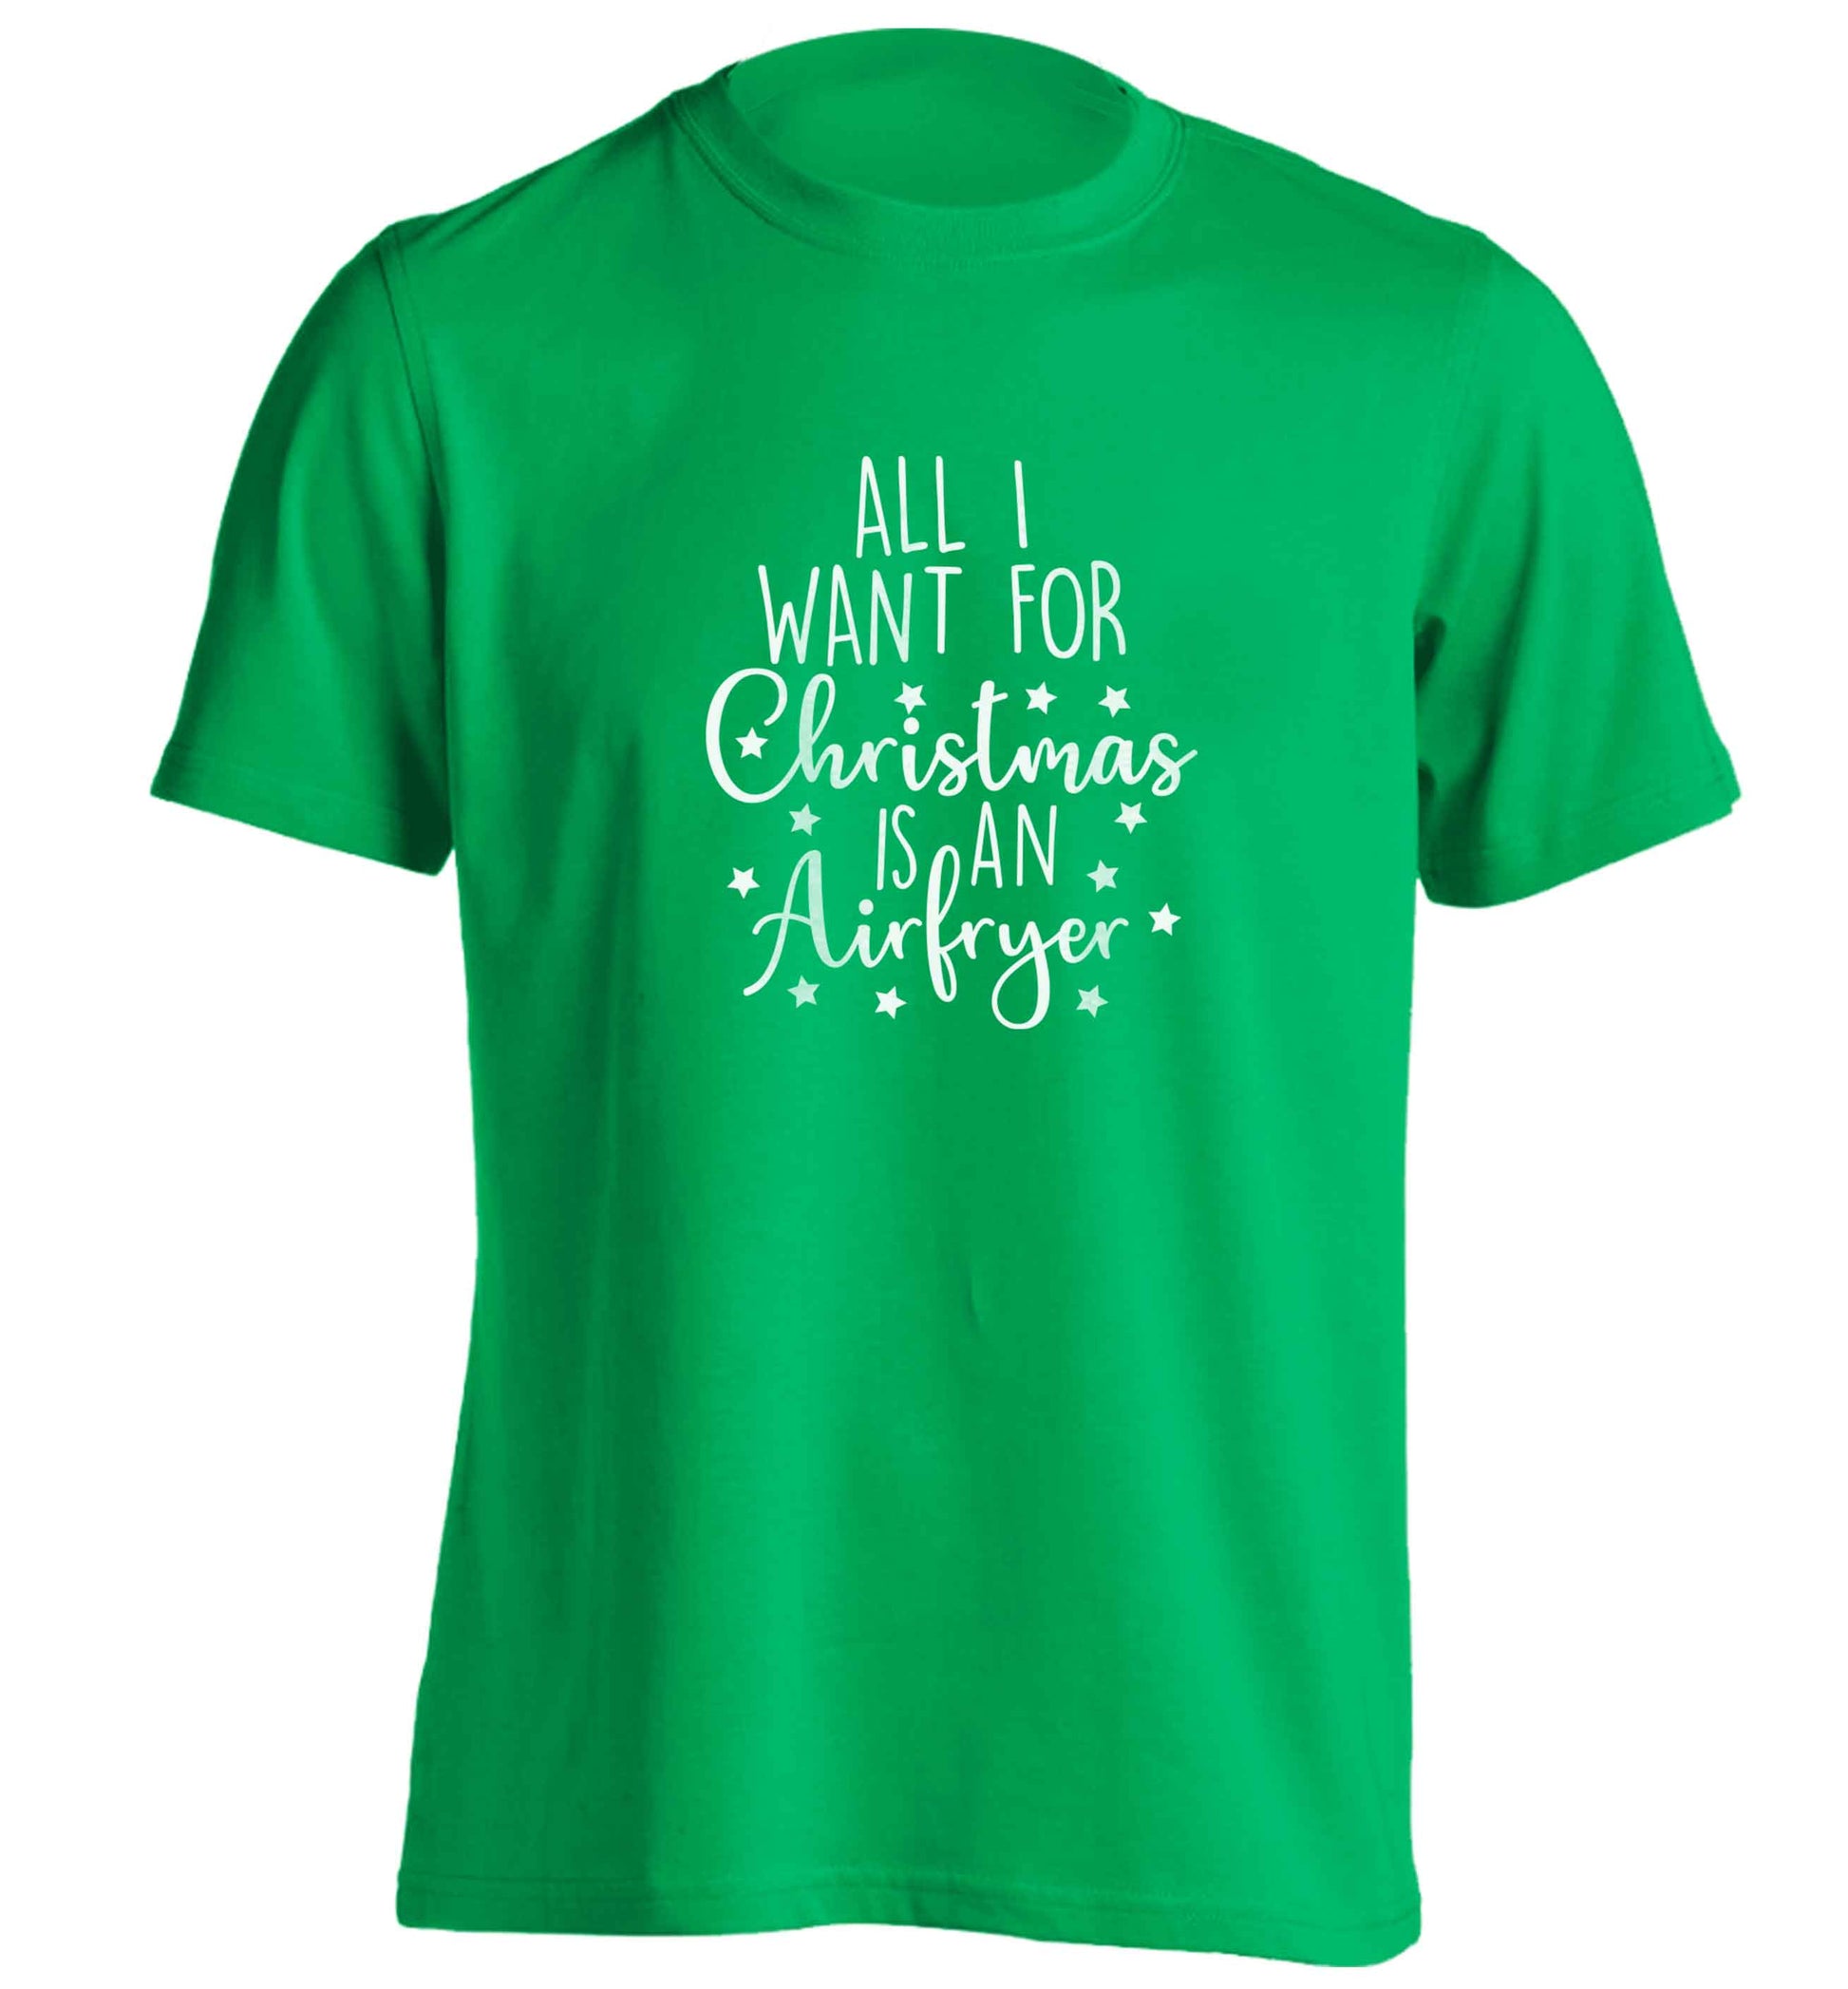 All I want for Christmas is an airfryeradults unisex green Tshirt 2XL